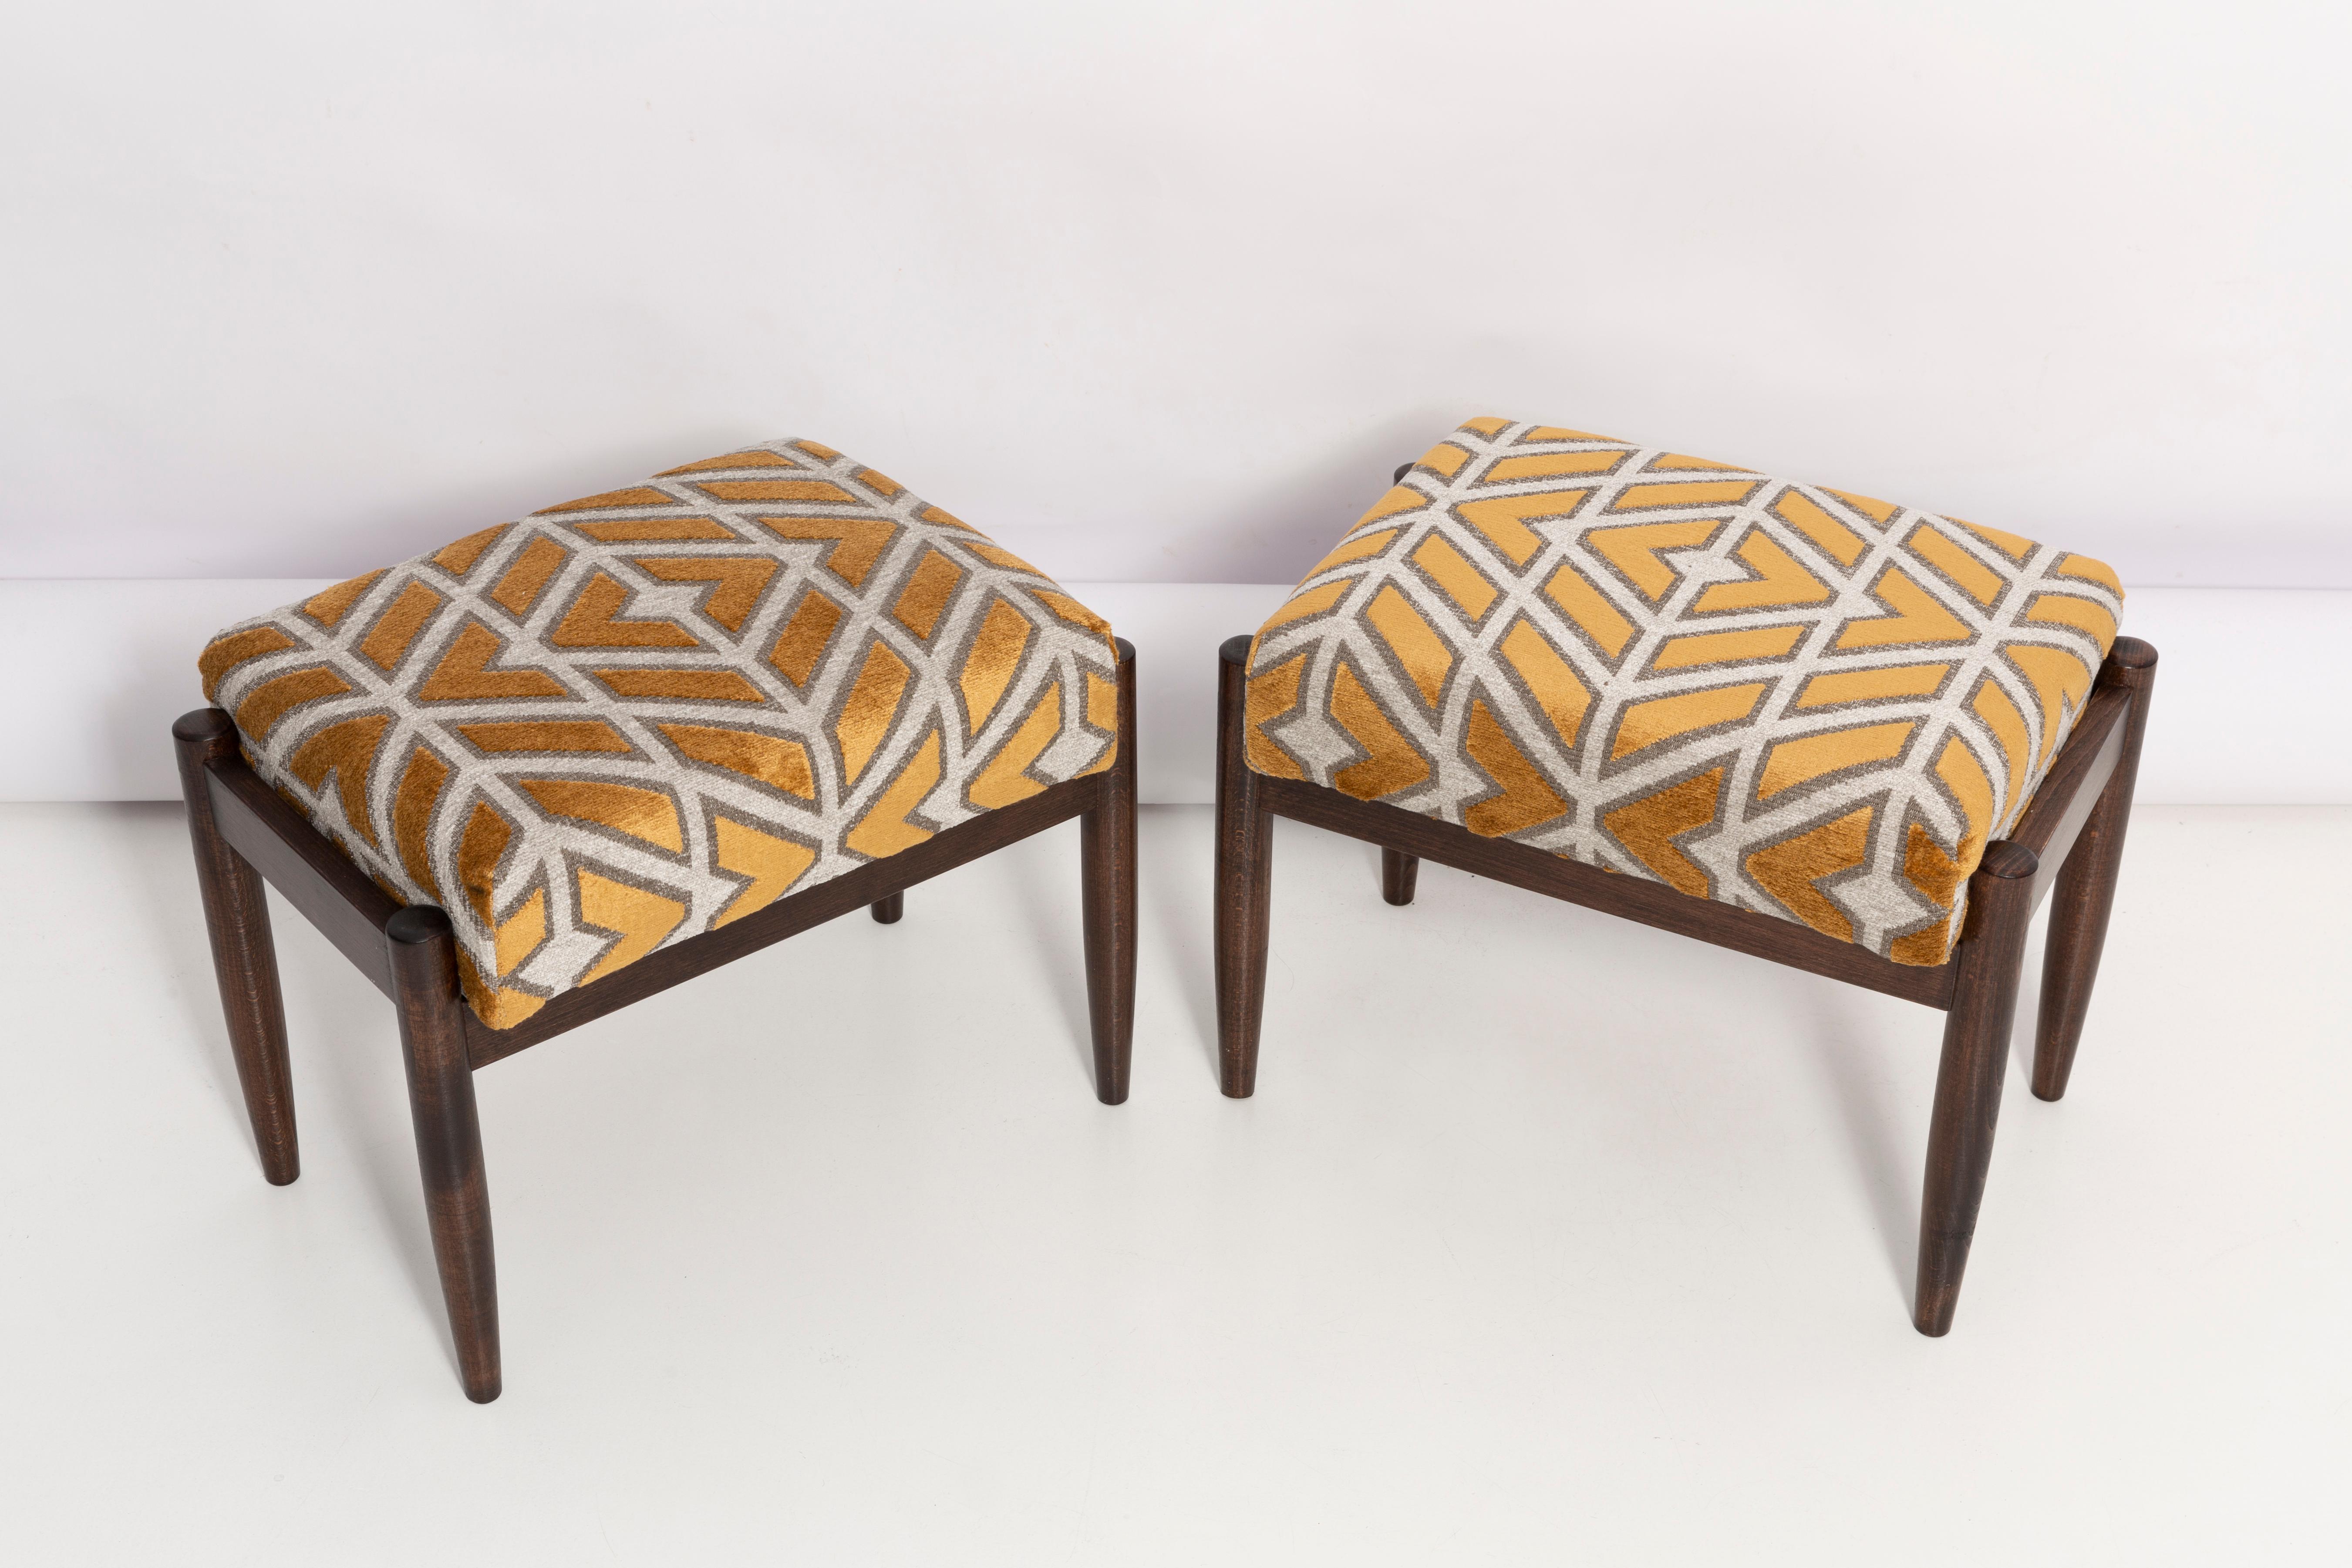 Hand-Crafted Pair of 20th Century Yellow Pattern Velvet Vintage Stools, Edmund Homa, 1960s For Sale